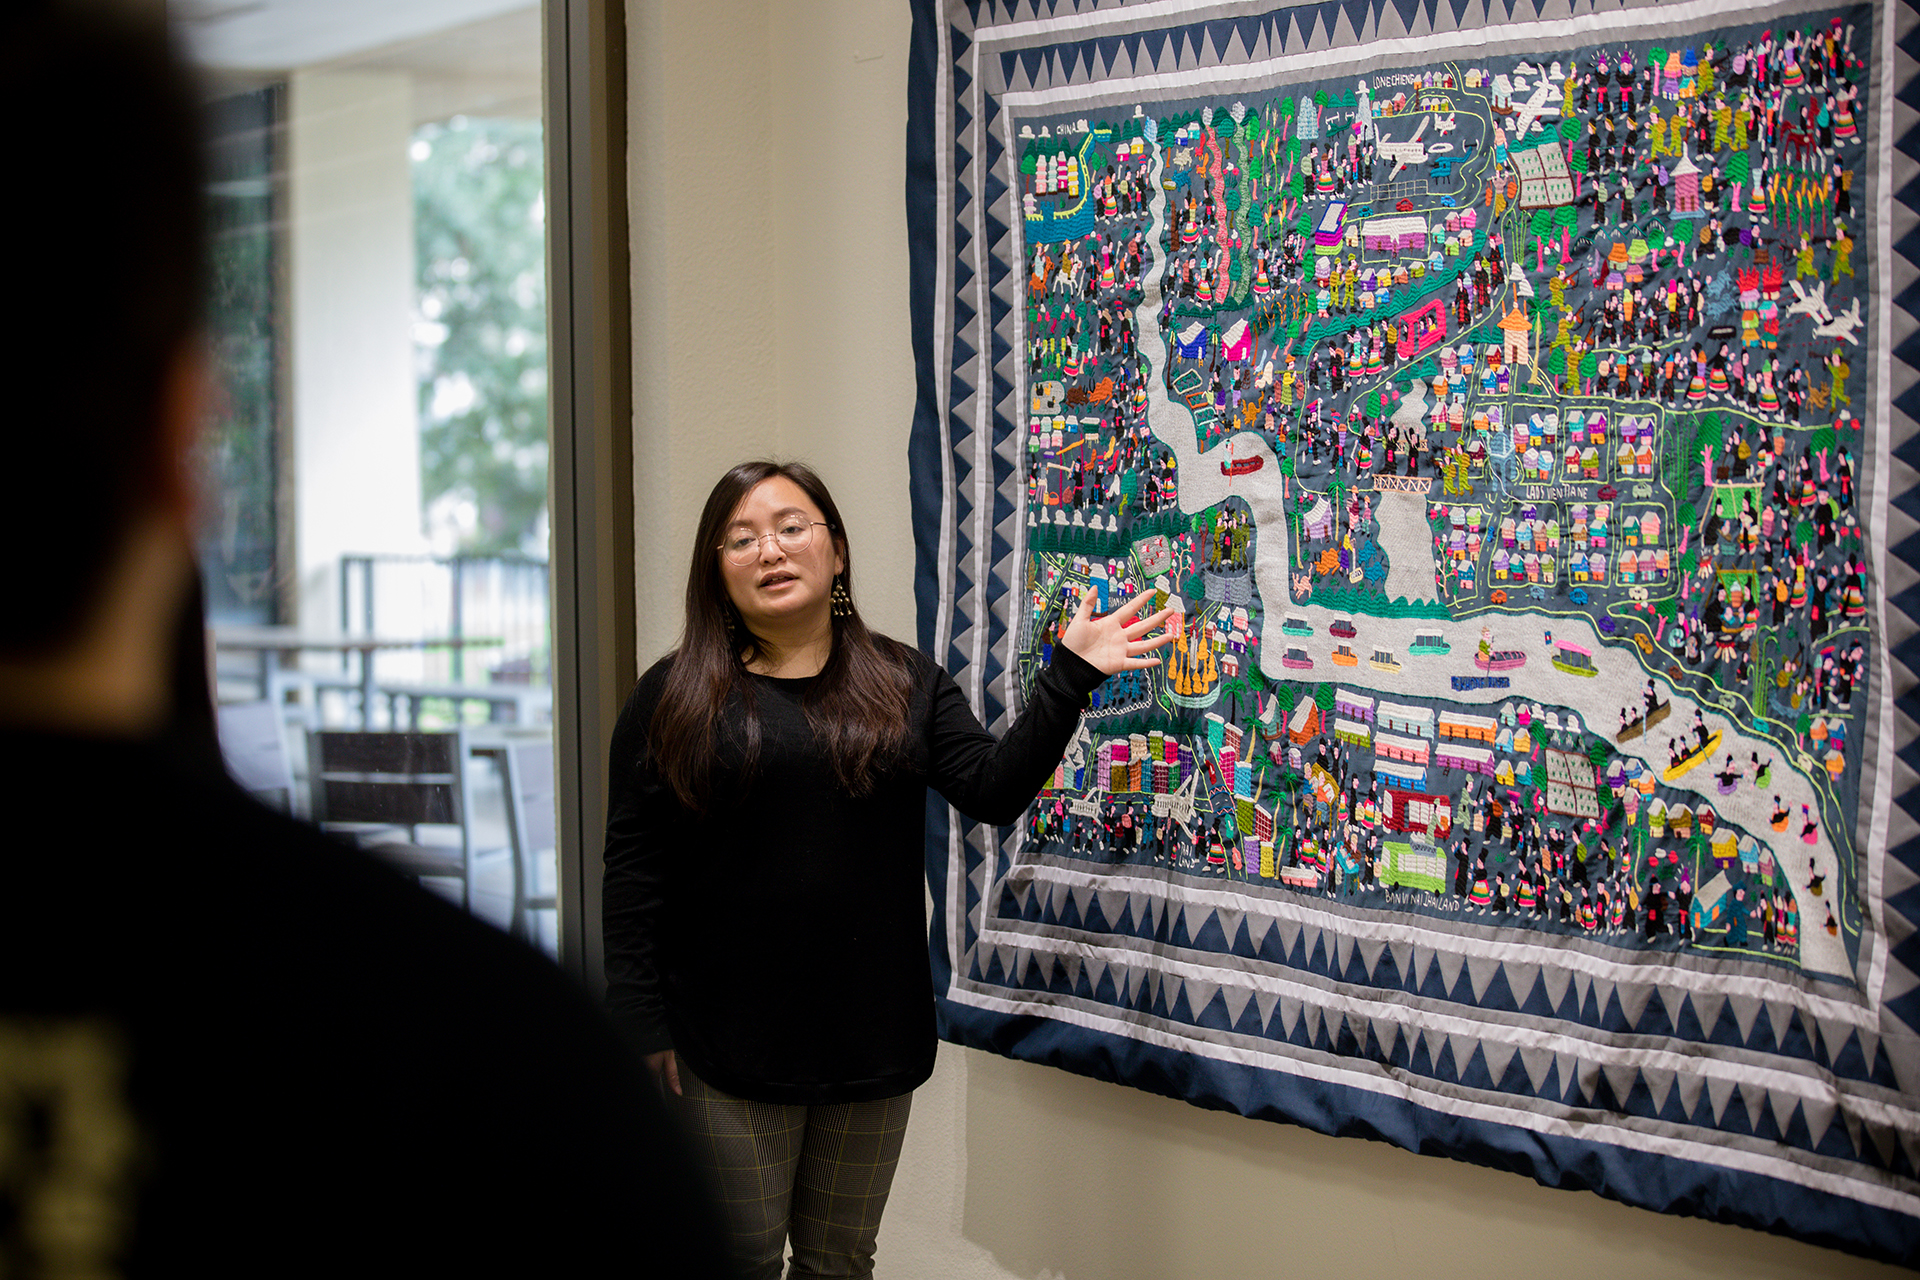 A woman tells a spectator about a large traditional Hmong story cloth, which hangs on the wall.